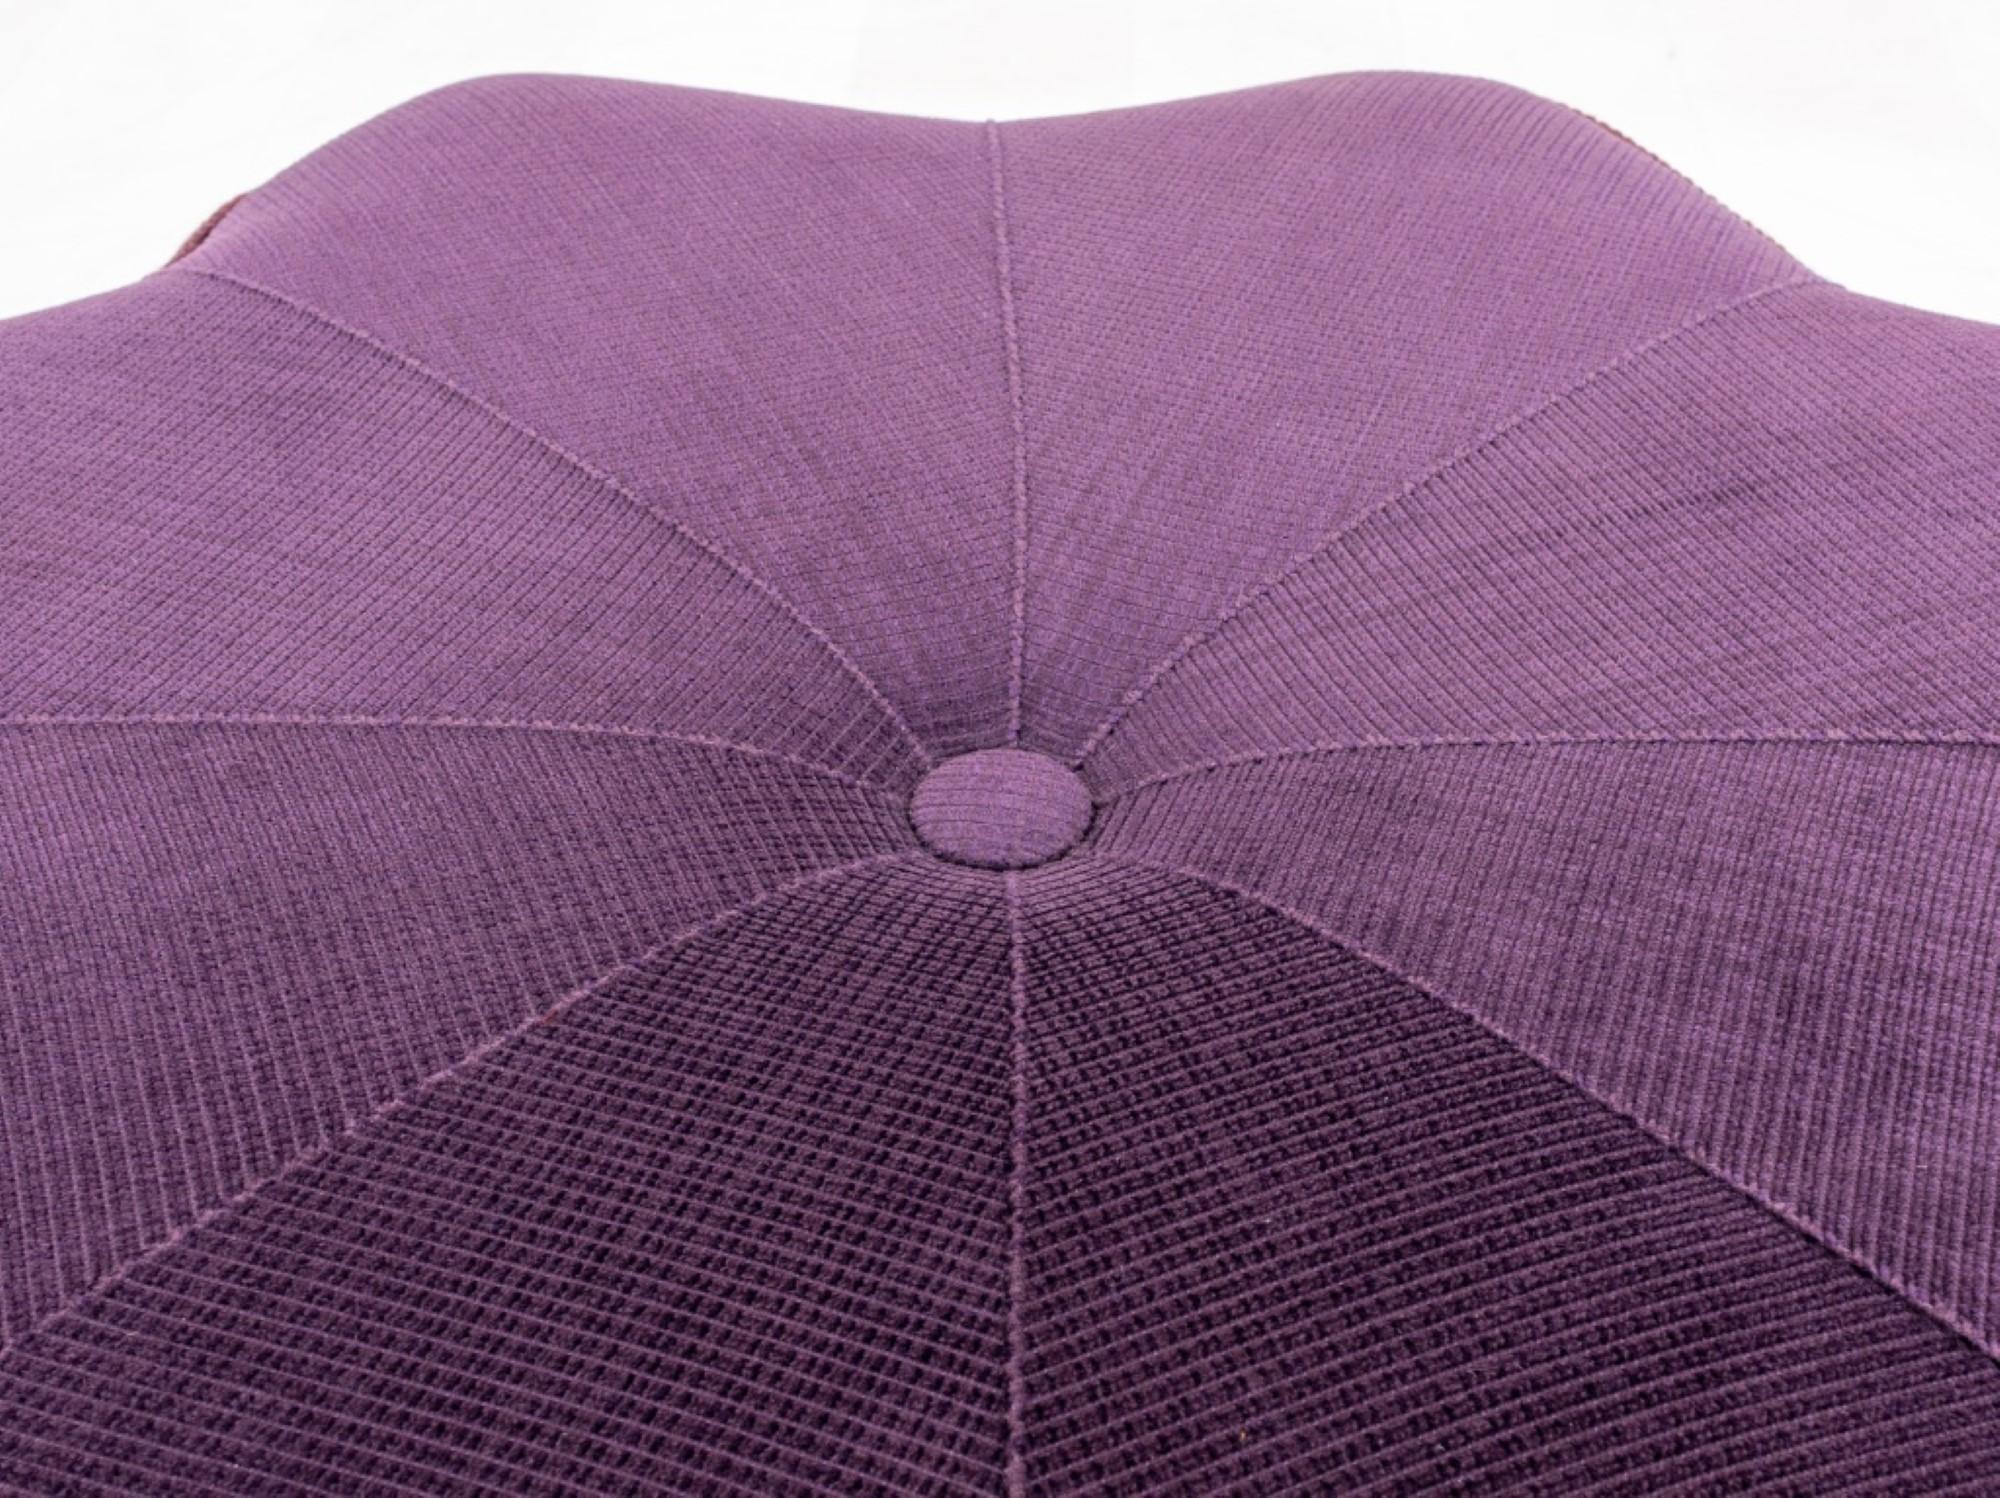 
The Victorian-inspired shaped floriform purple corduroy upholstered pouf or ottoman,

 has dimensions of approximately 16 inches in height and 36 inches in diameter.